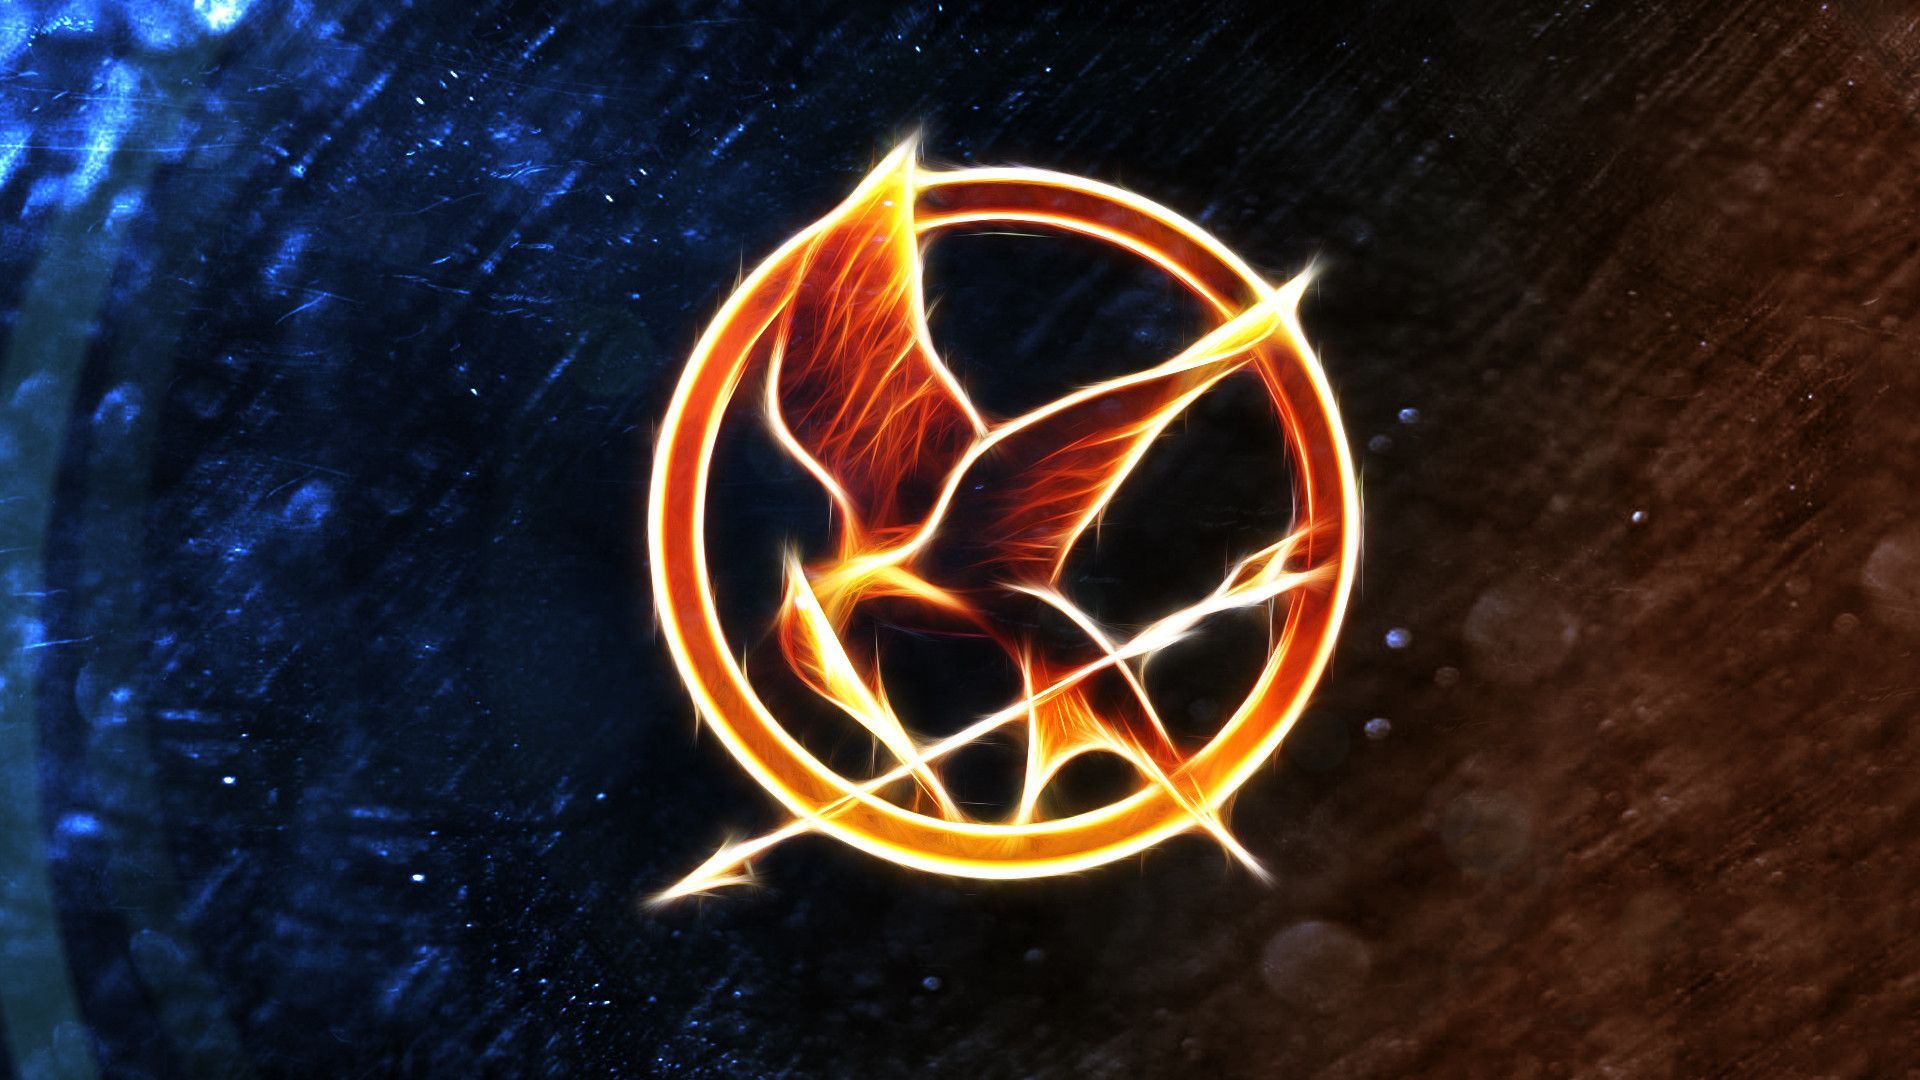 So uhh, after about a year, here's a version without text. Better late than ever amirite? (Wallpaper). Hunger games wallpaper, Hunger games, Hunger games fandom